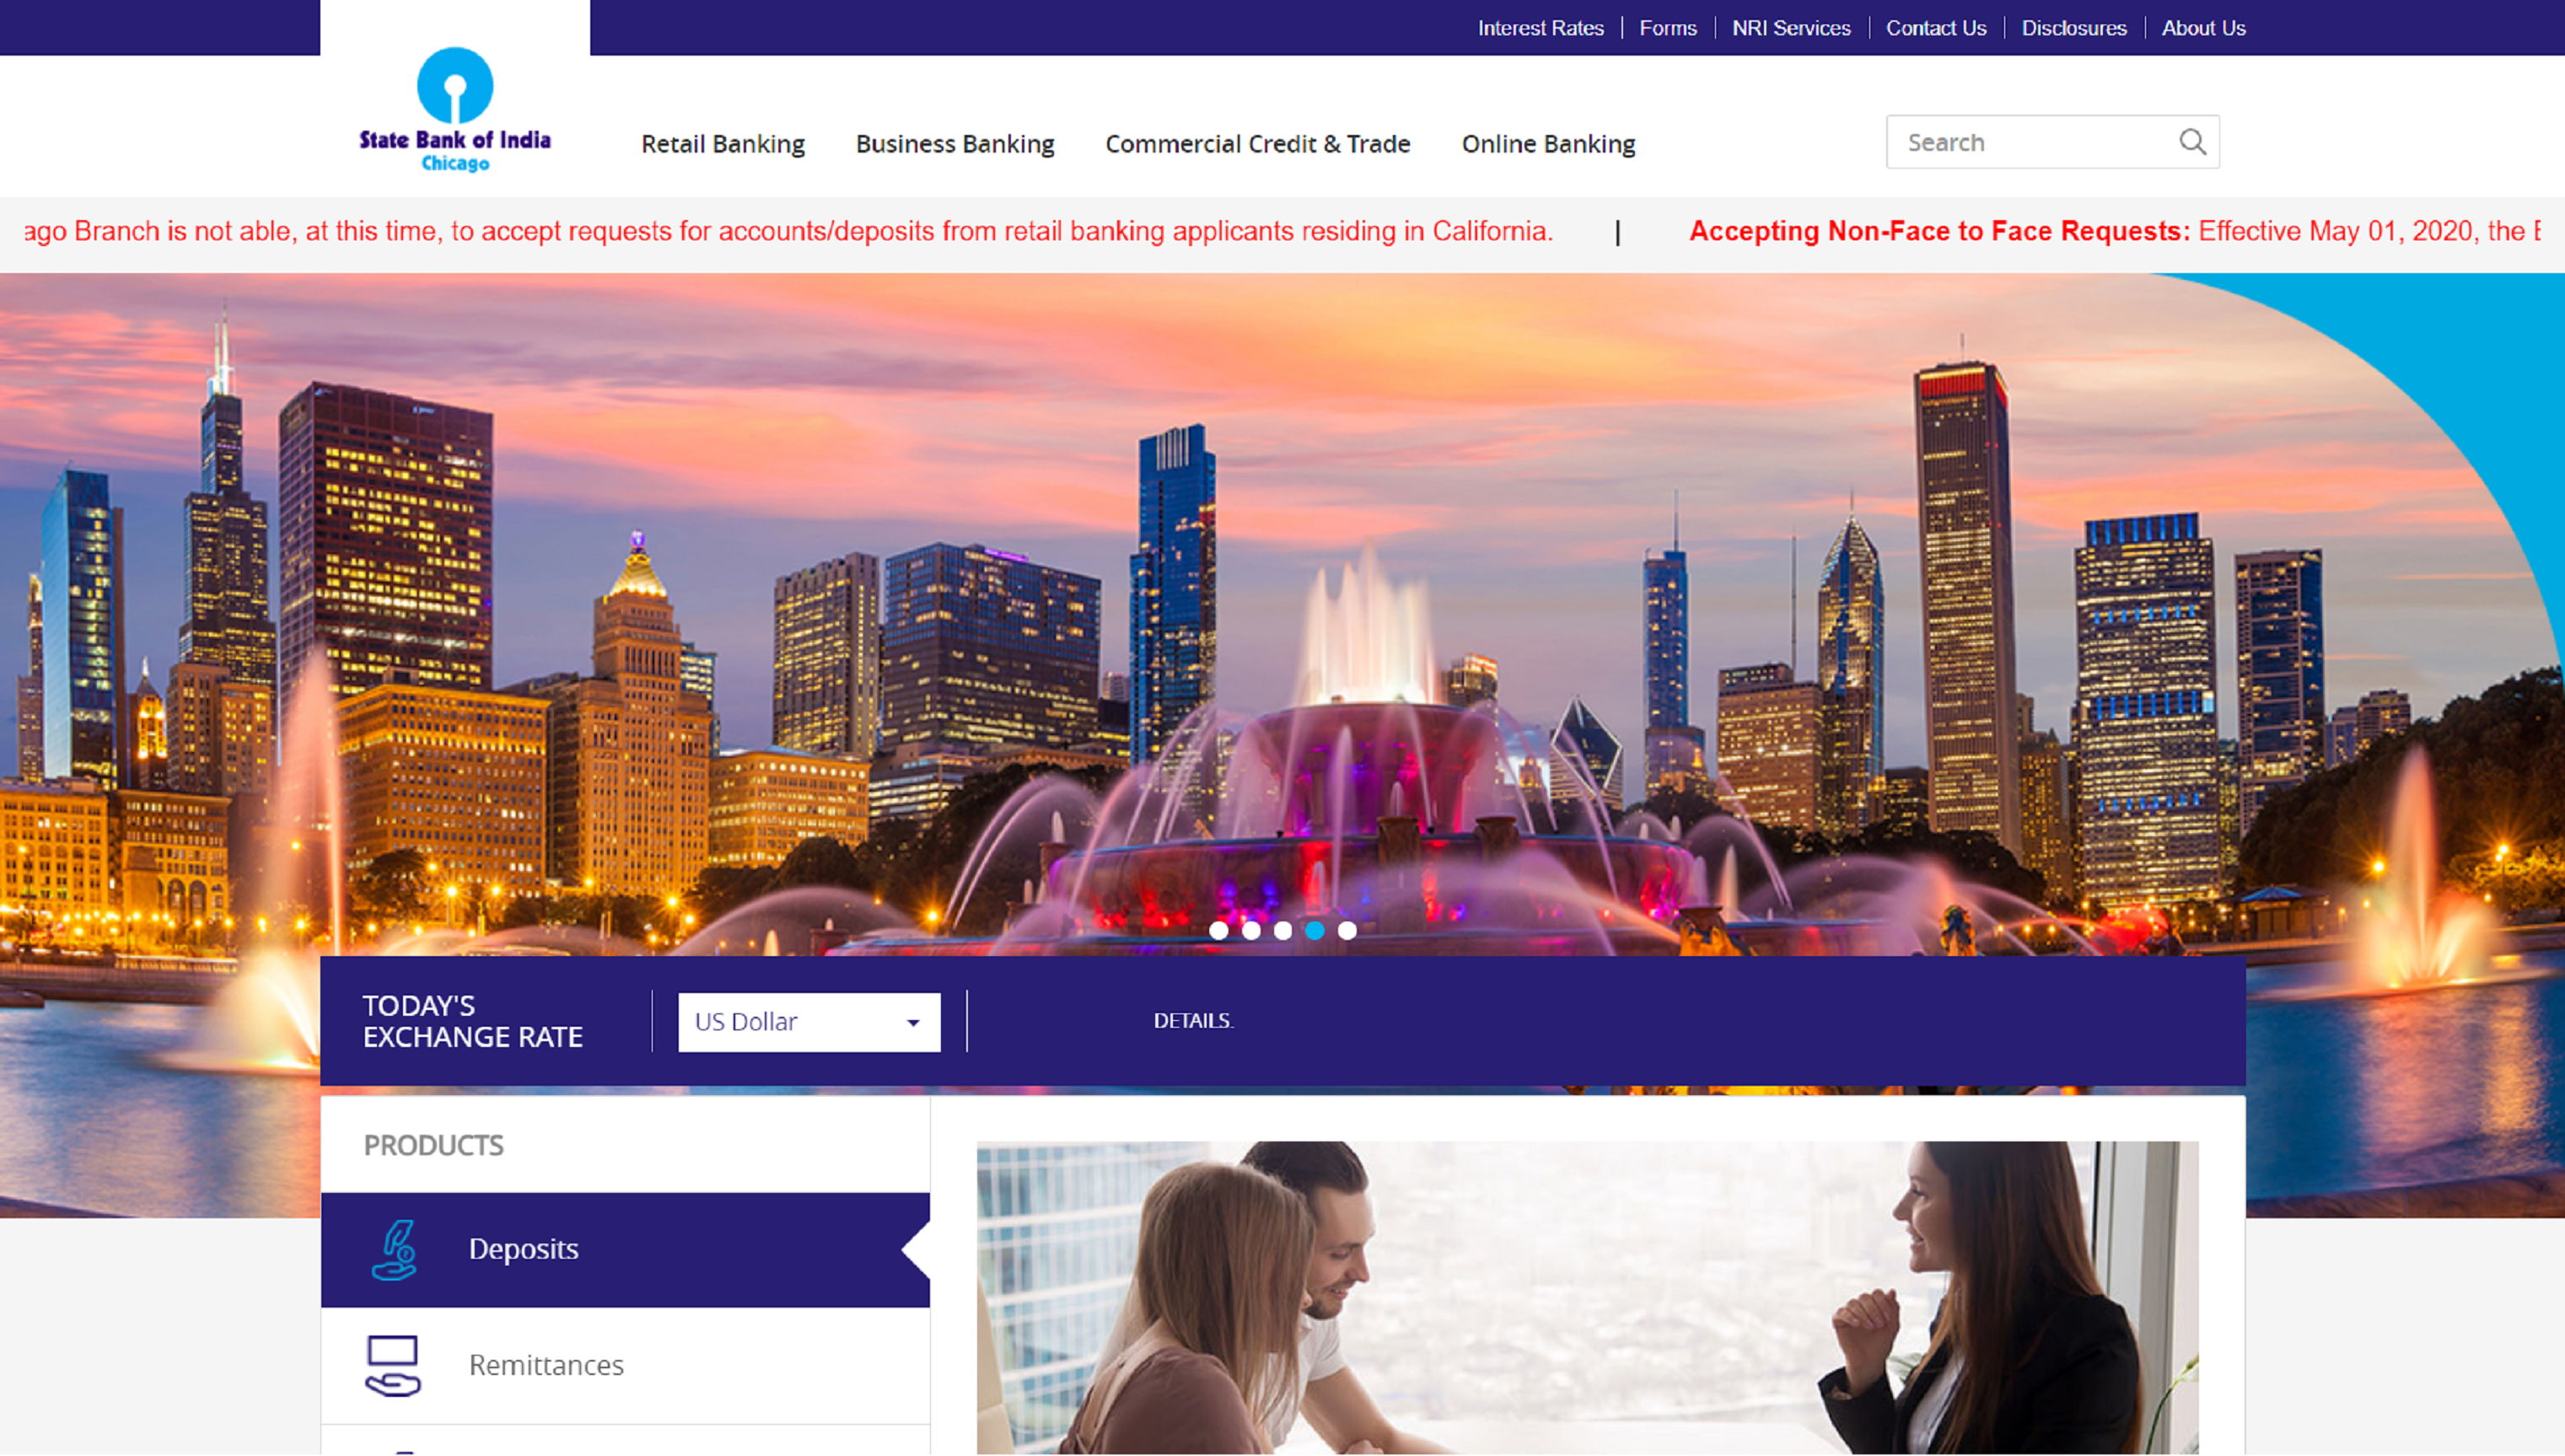 Awesome new site helping identify the Chicago services for India's premier bank